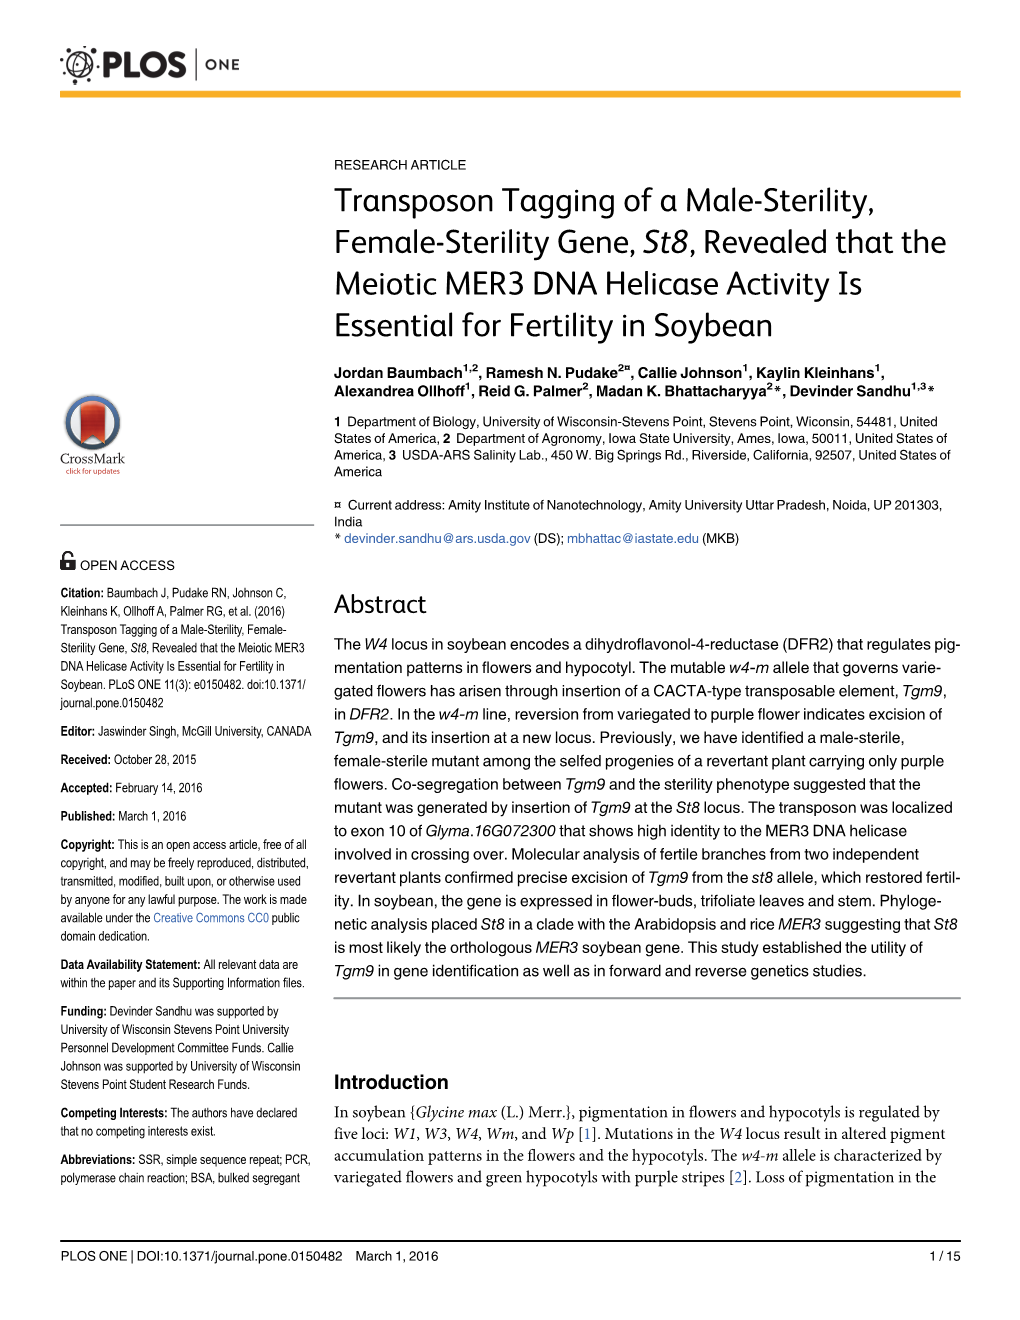 Transposon Tagging of a Male-Sterility, Female-Sterility Gene, St8, Revealed That the Meiotic MER3 DNA Helicase Activity Is Essential for Fertility in Soybean